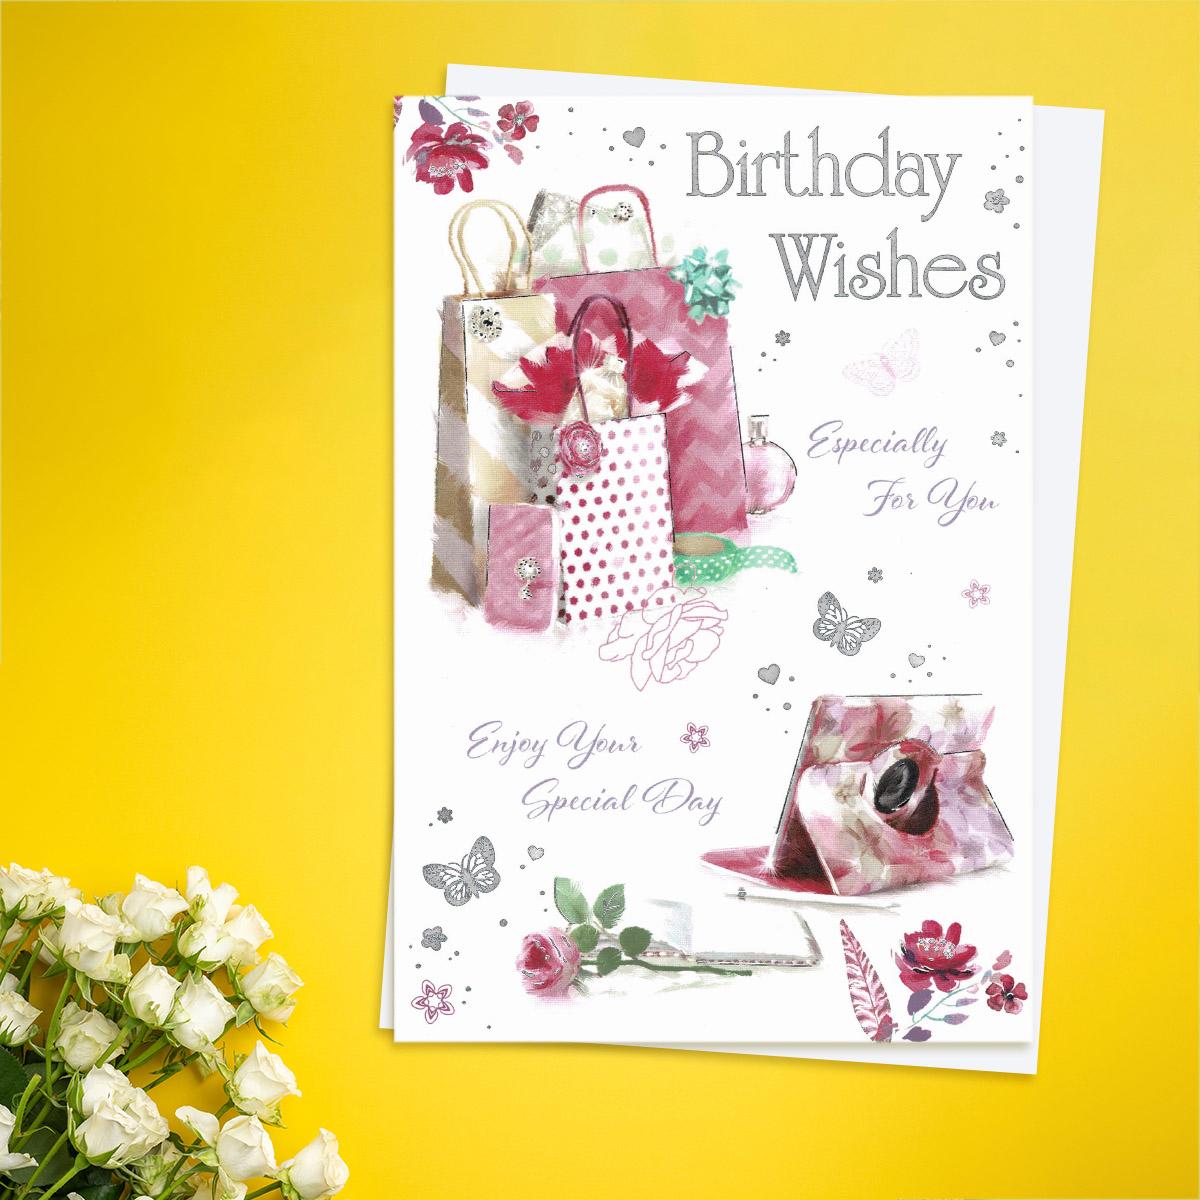 Birthday Wishes & Gifts Card Front Image